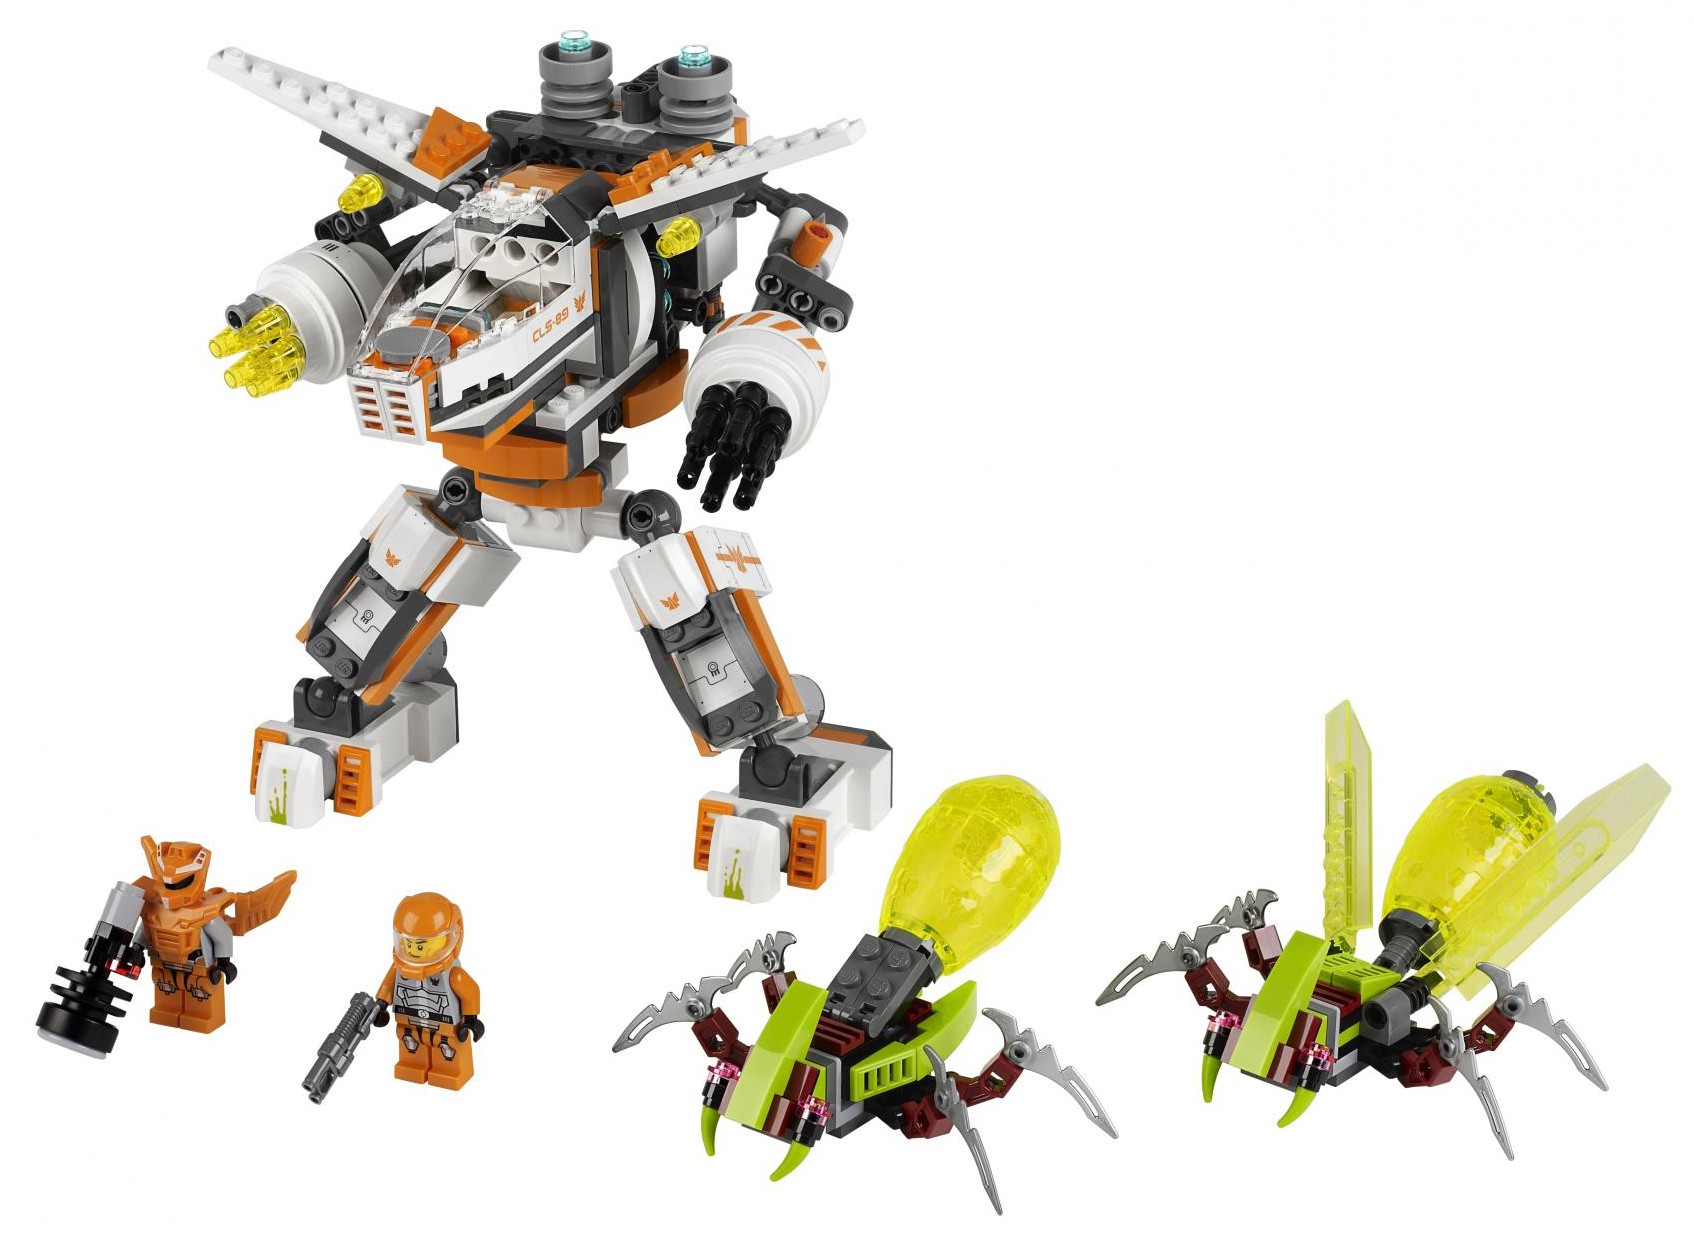 LEGO Galaxy Squad Summer 2013 Sets Revealed: Photos and Preview! - Bricks and Bloks